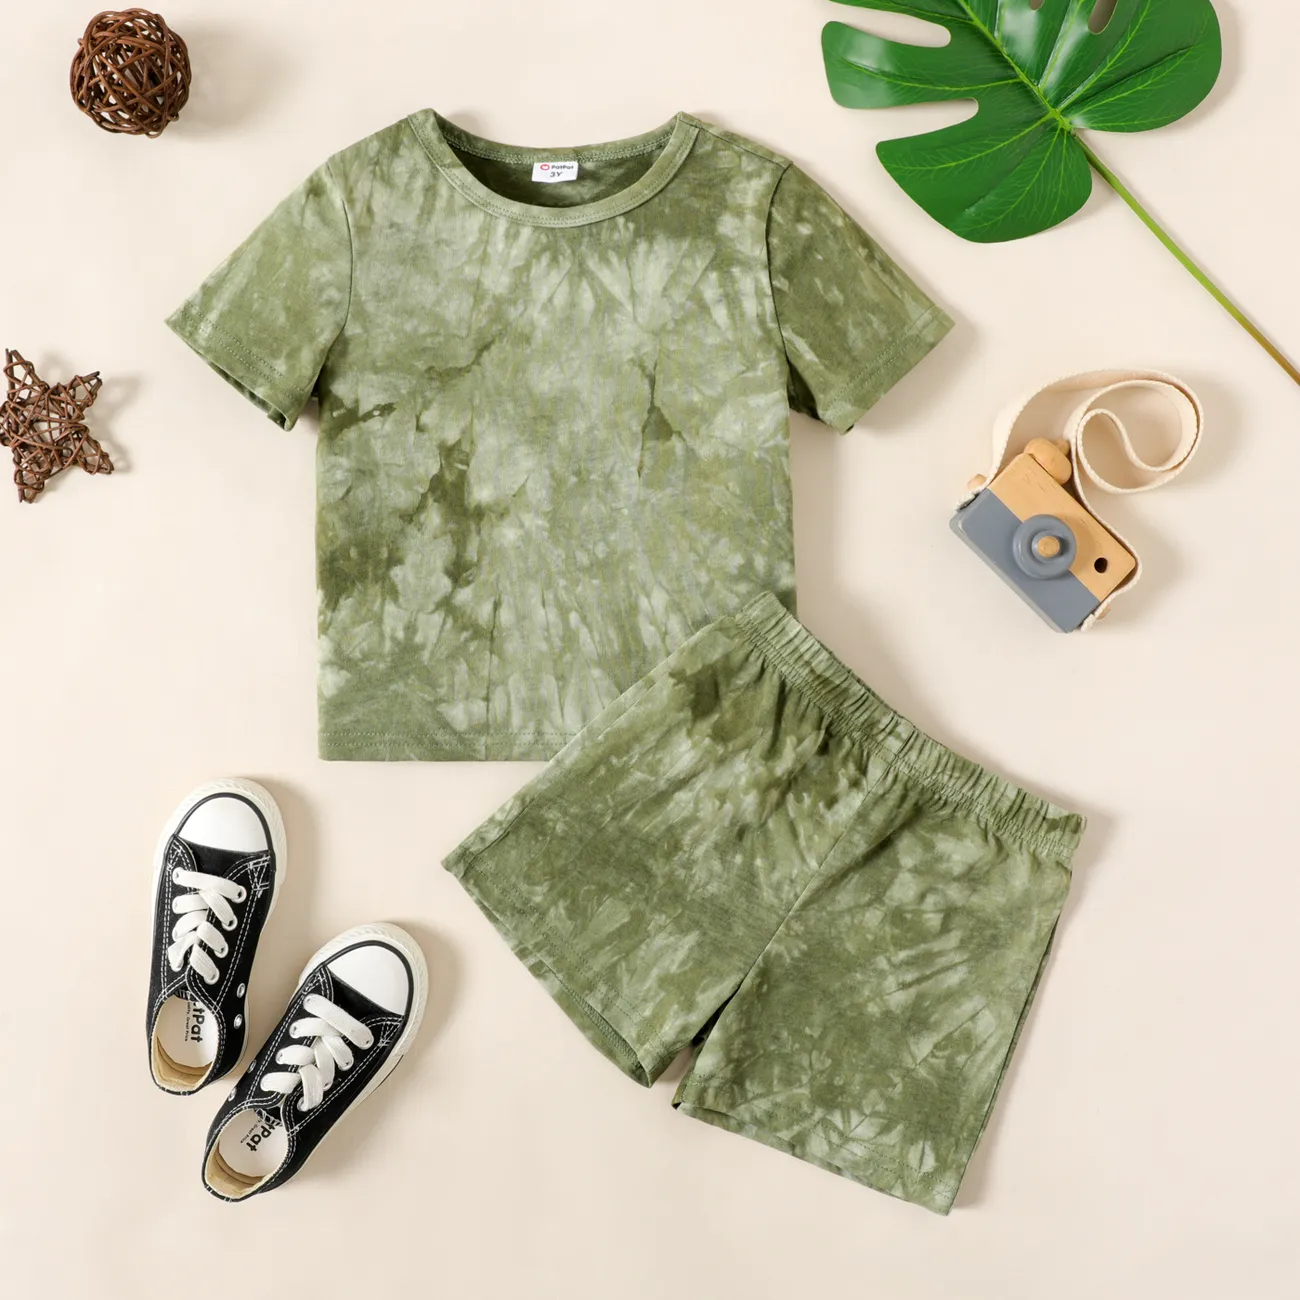 2-piece Toddler Boy 100% Cotton Tie Dyed Short-sleeve Tee and Elasticized Shorts Set Army green big image 1